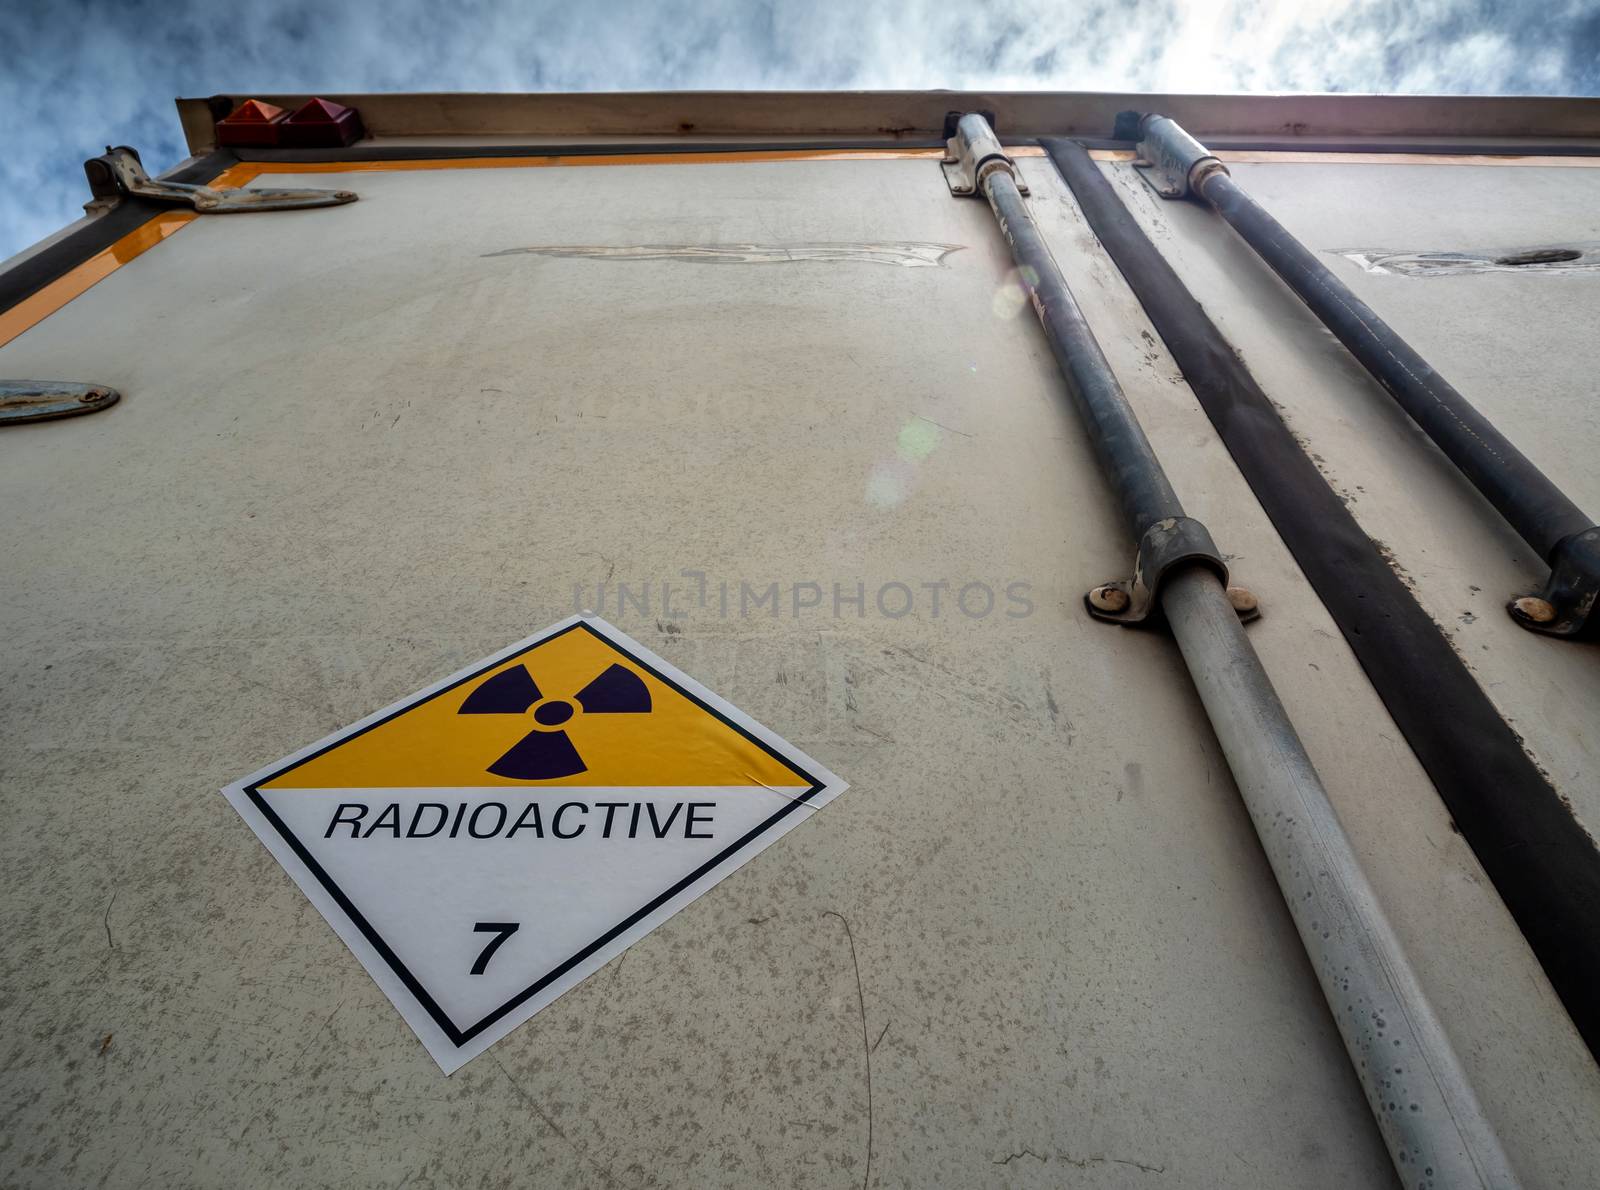 Radiation warning sign on the Hazardous materials transport label Class 7 at the aluminum container of transport truck